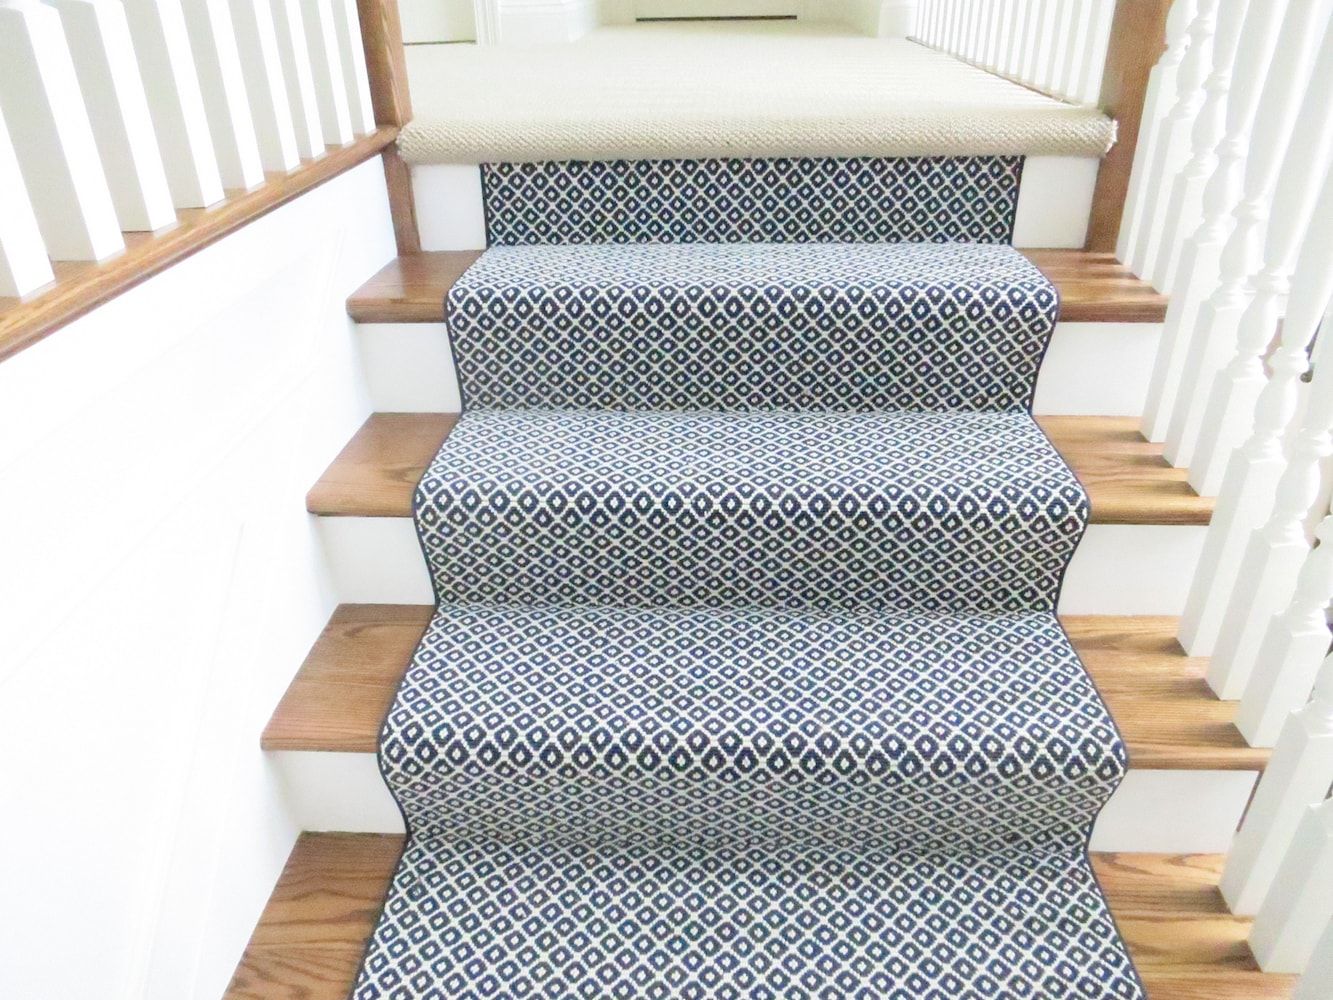 Stair Runner Ideas: 11 Ways To Introduce Color And Pattern